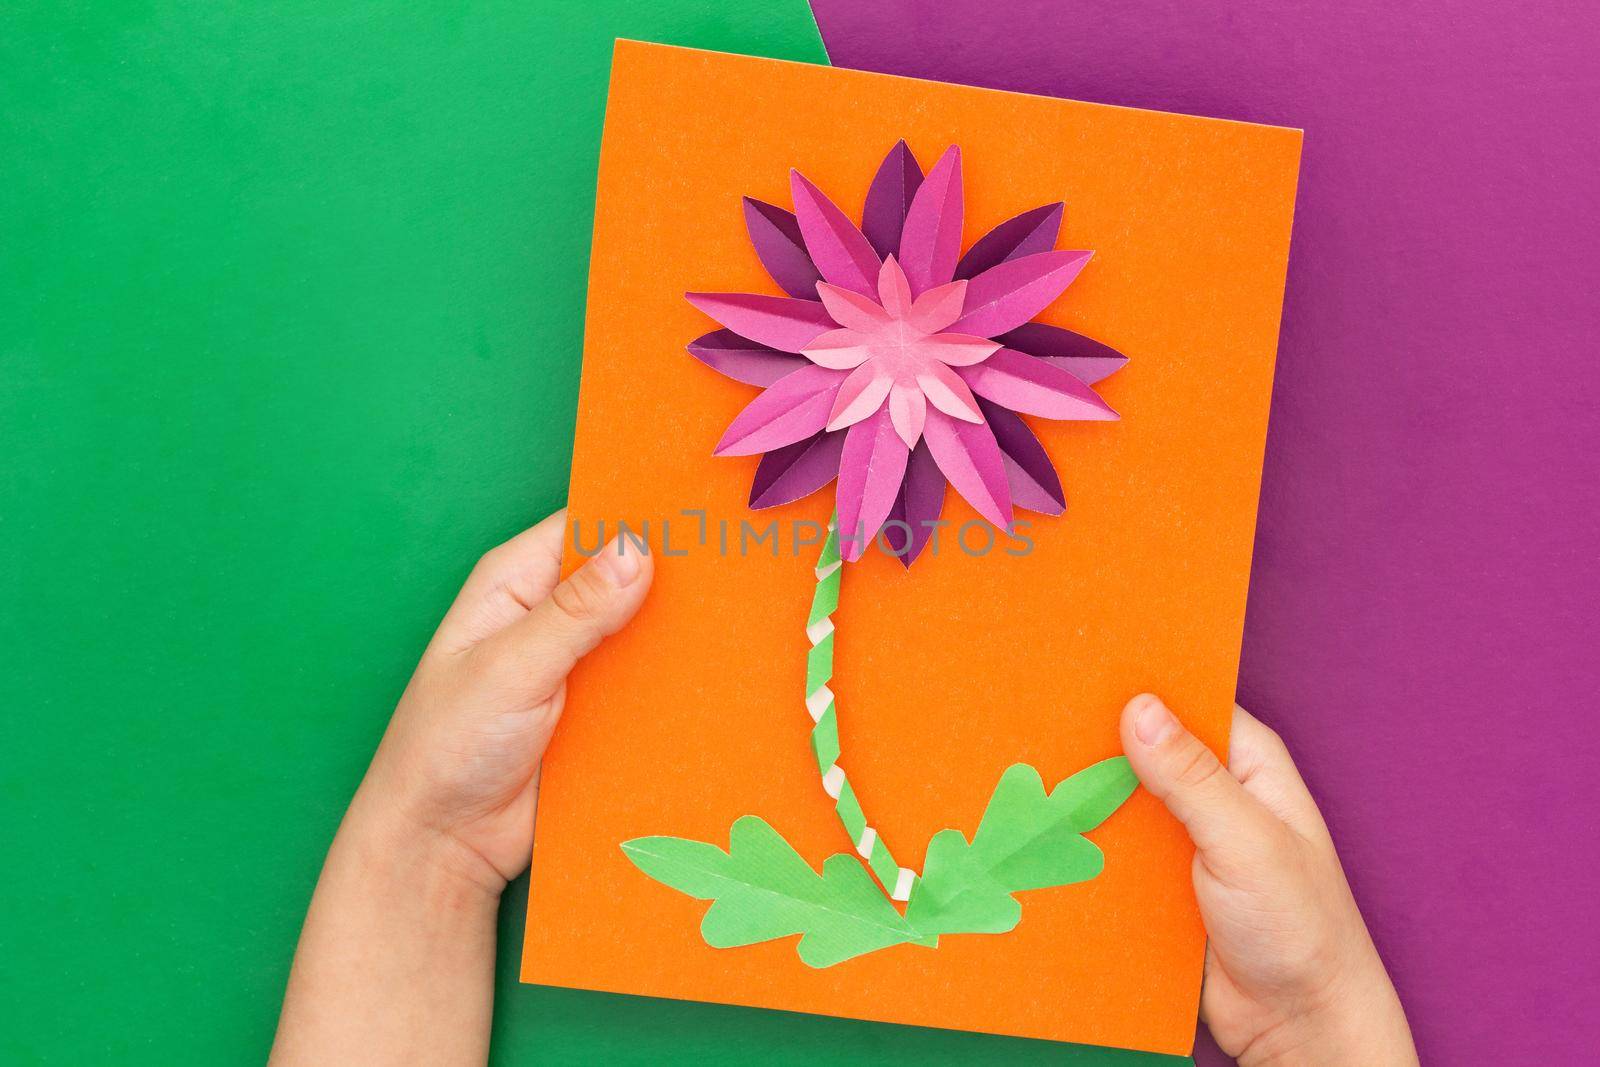 Top view of child hands holding papercraft violet crysanthemum flower made by child on orange worksheet on violet and green background. Present for mother s day